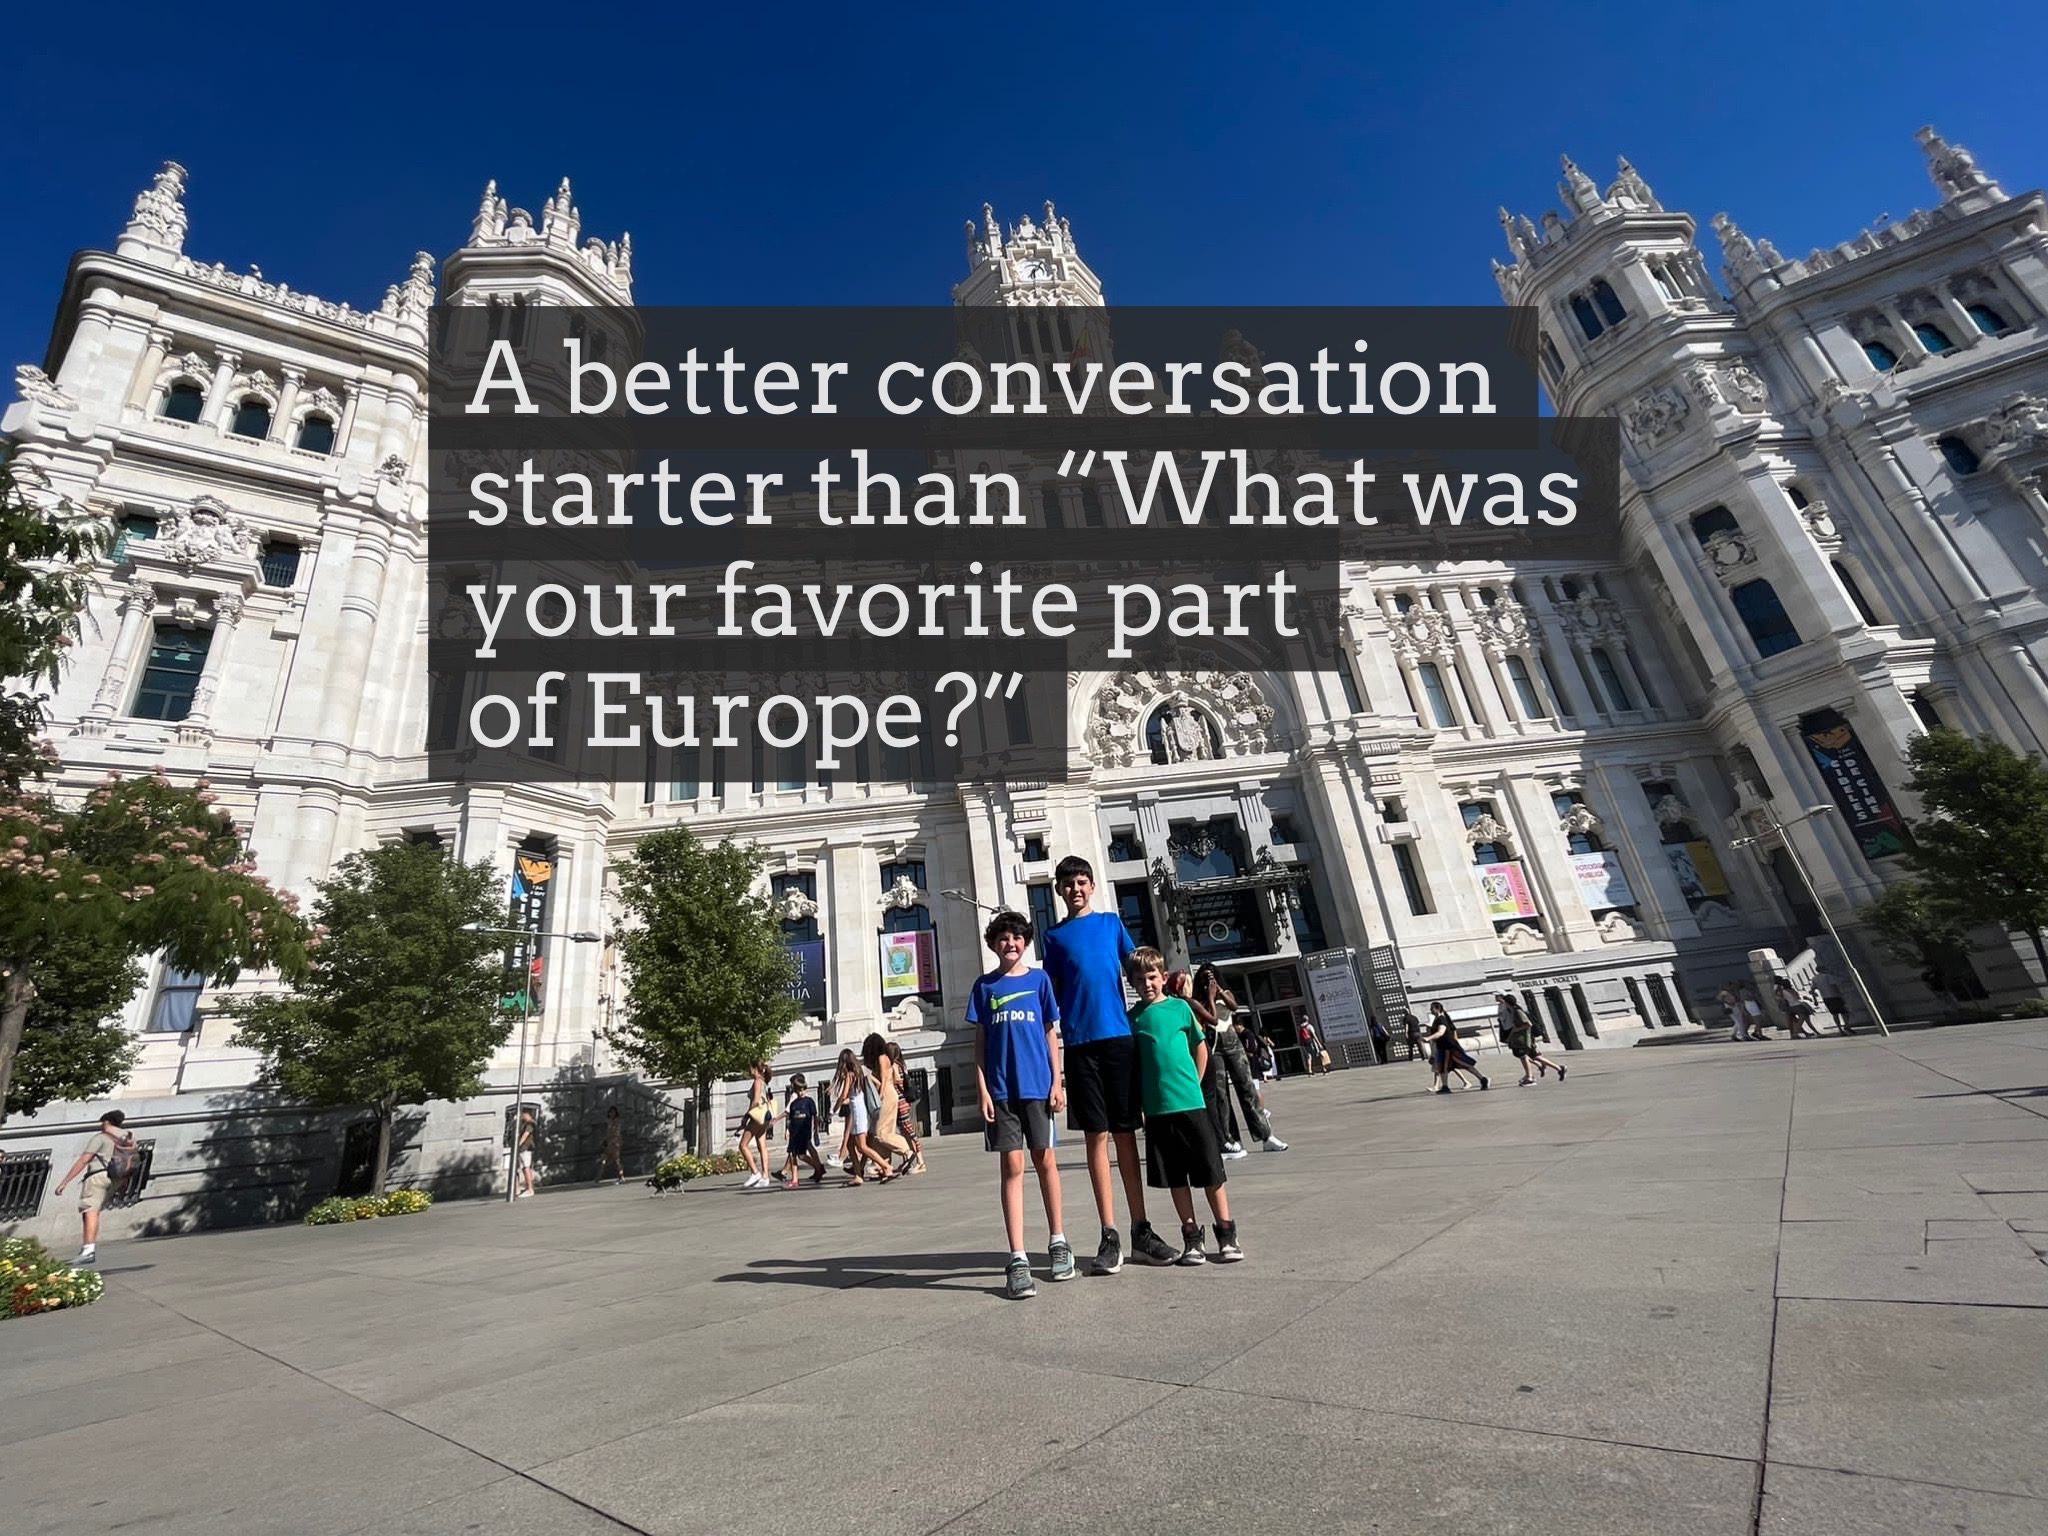 A Better Conversation Starter Than “What was your favorite part of Europe?”